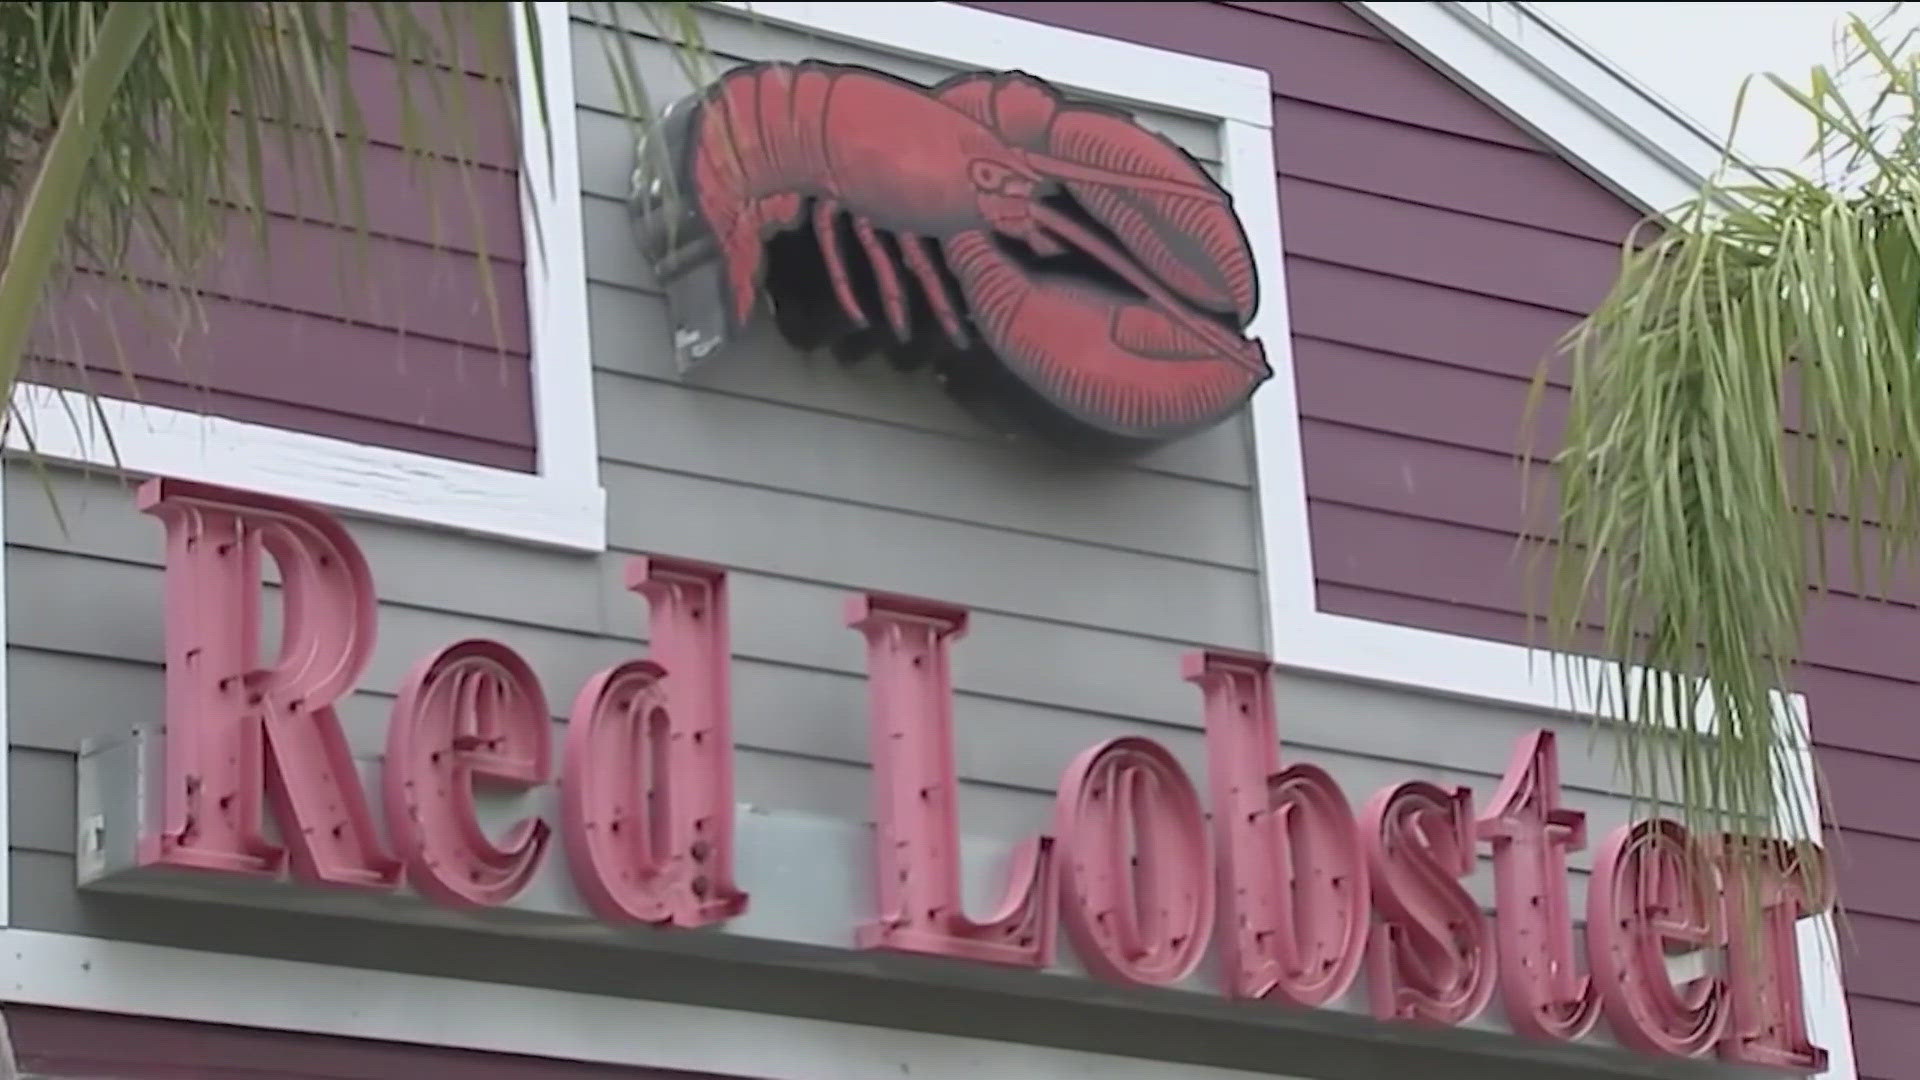 The seafood chain recently filed for bankruptcy, with closures in Texas cities like Dallas and Houston.